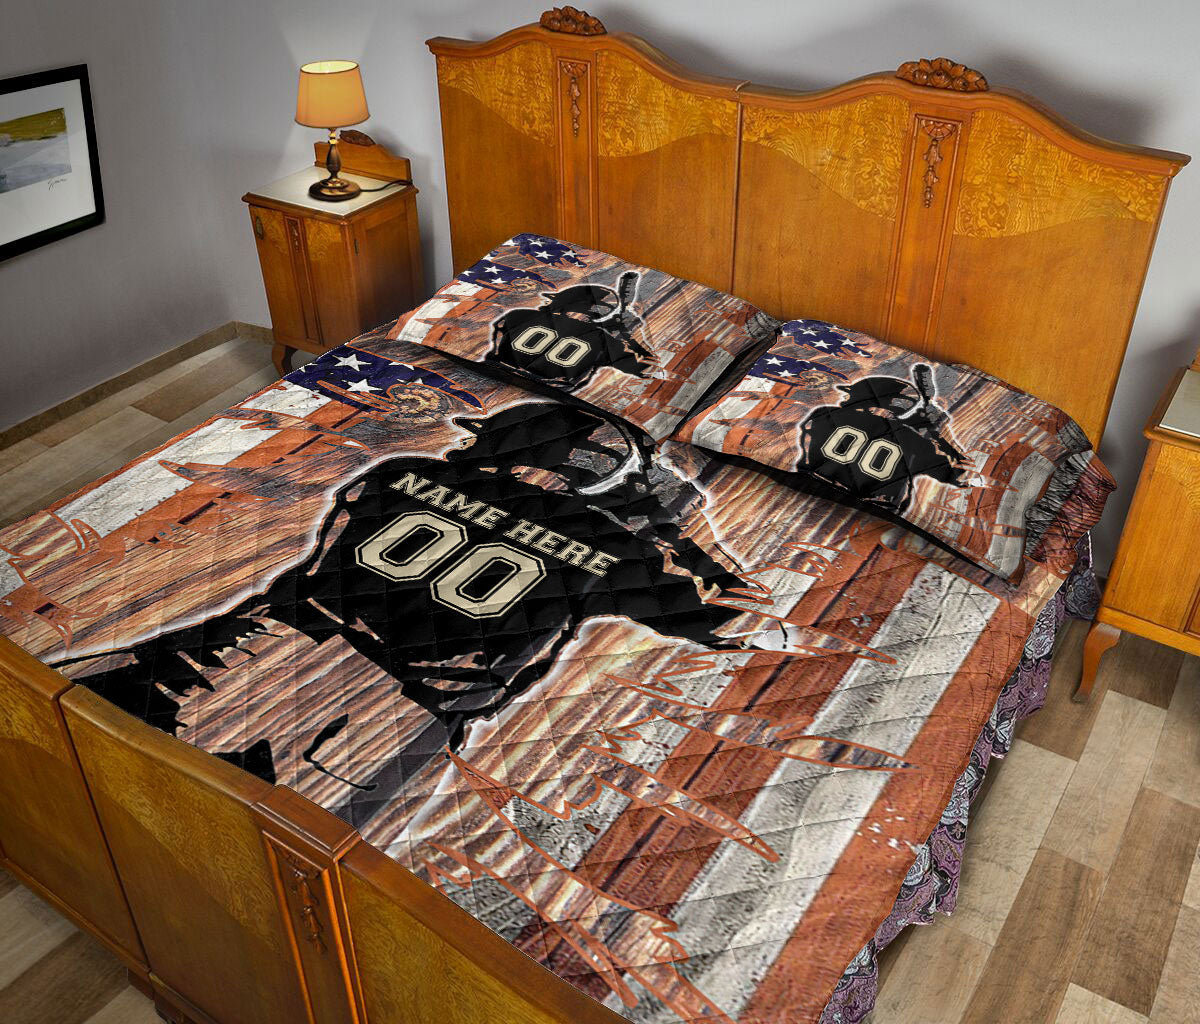 Ohaprints-Quilt-Bed-Set-Pillowcase-America-Flag-Baseball-Player-Batter-Russtic-Custom-Personalized-Name-Number-Blanket-Bedspread-Bedding-1921-Queen (80'' x 90'')